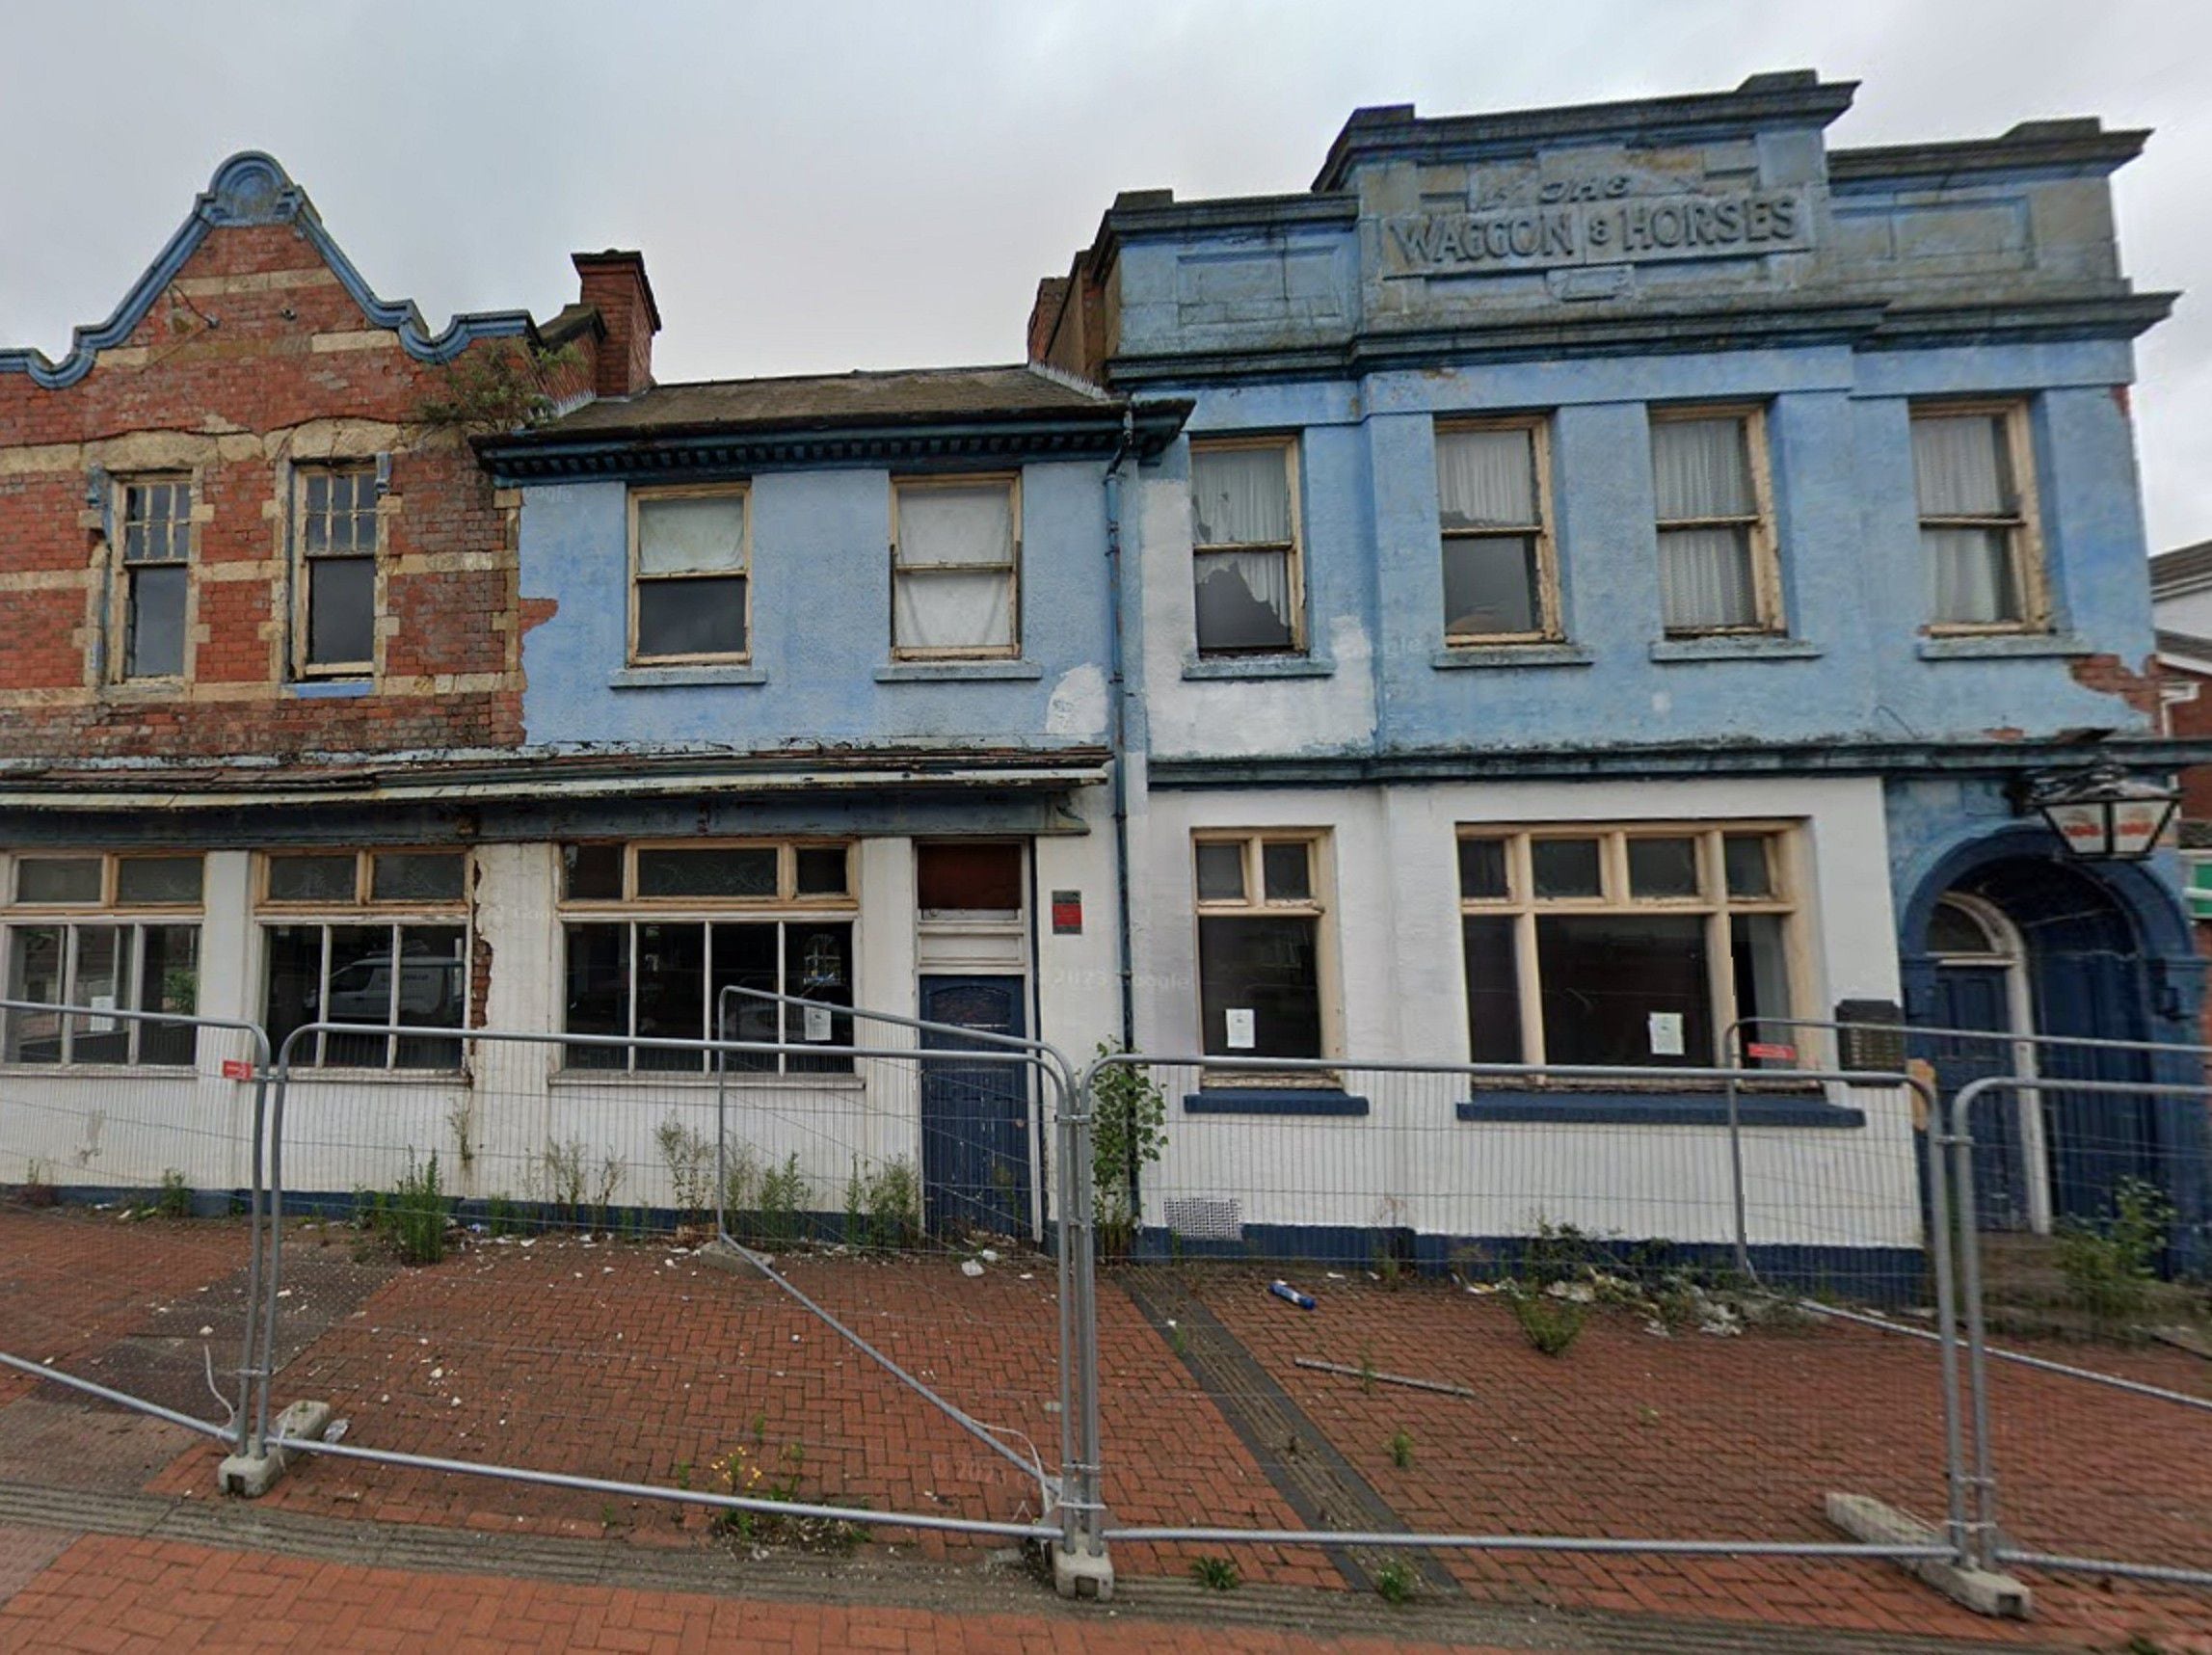 Crumbling pub forced to close after being at risk of 'total' collapse to be replaced